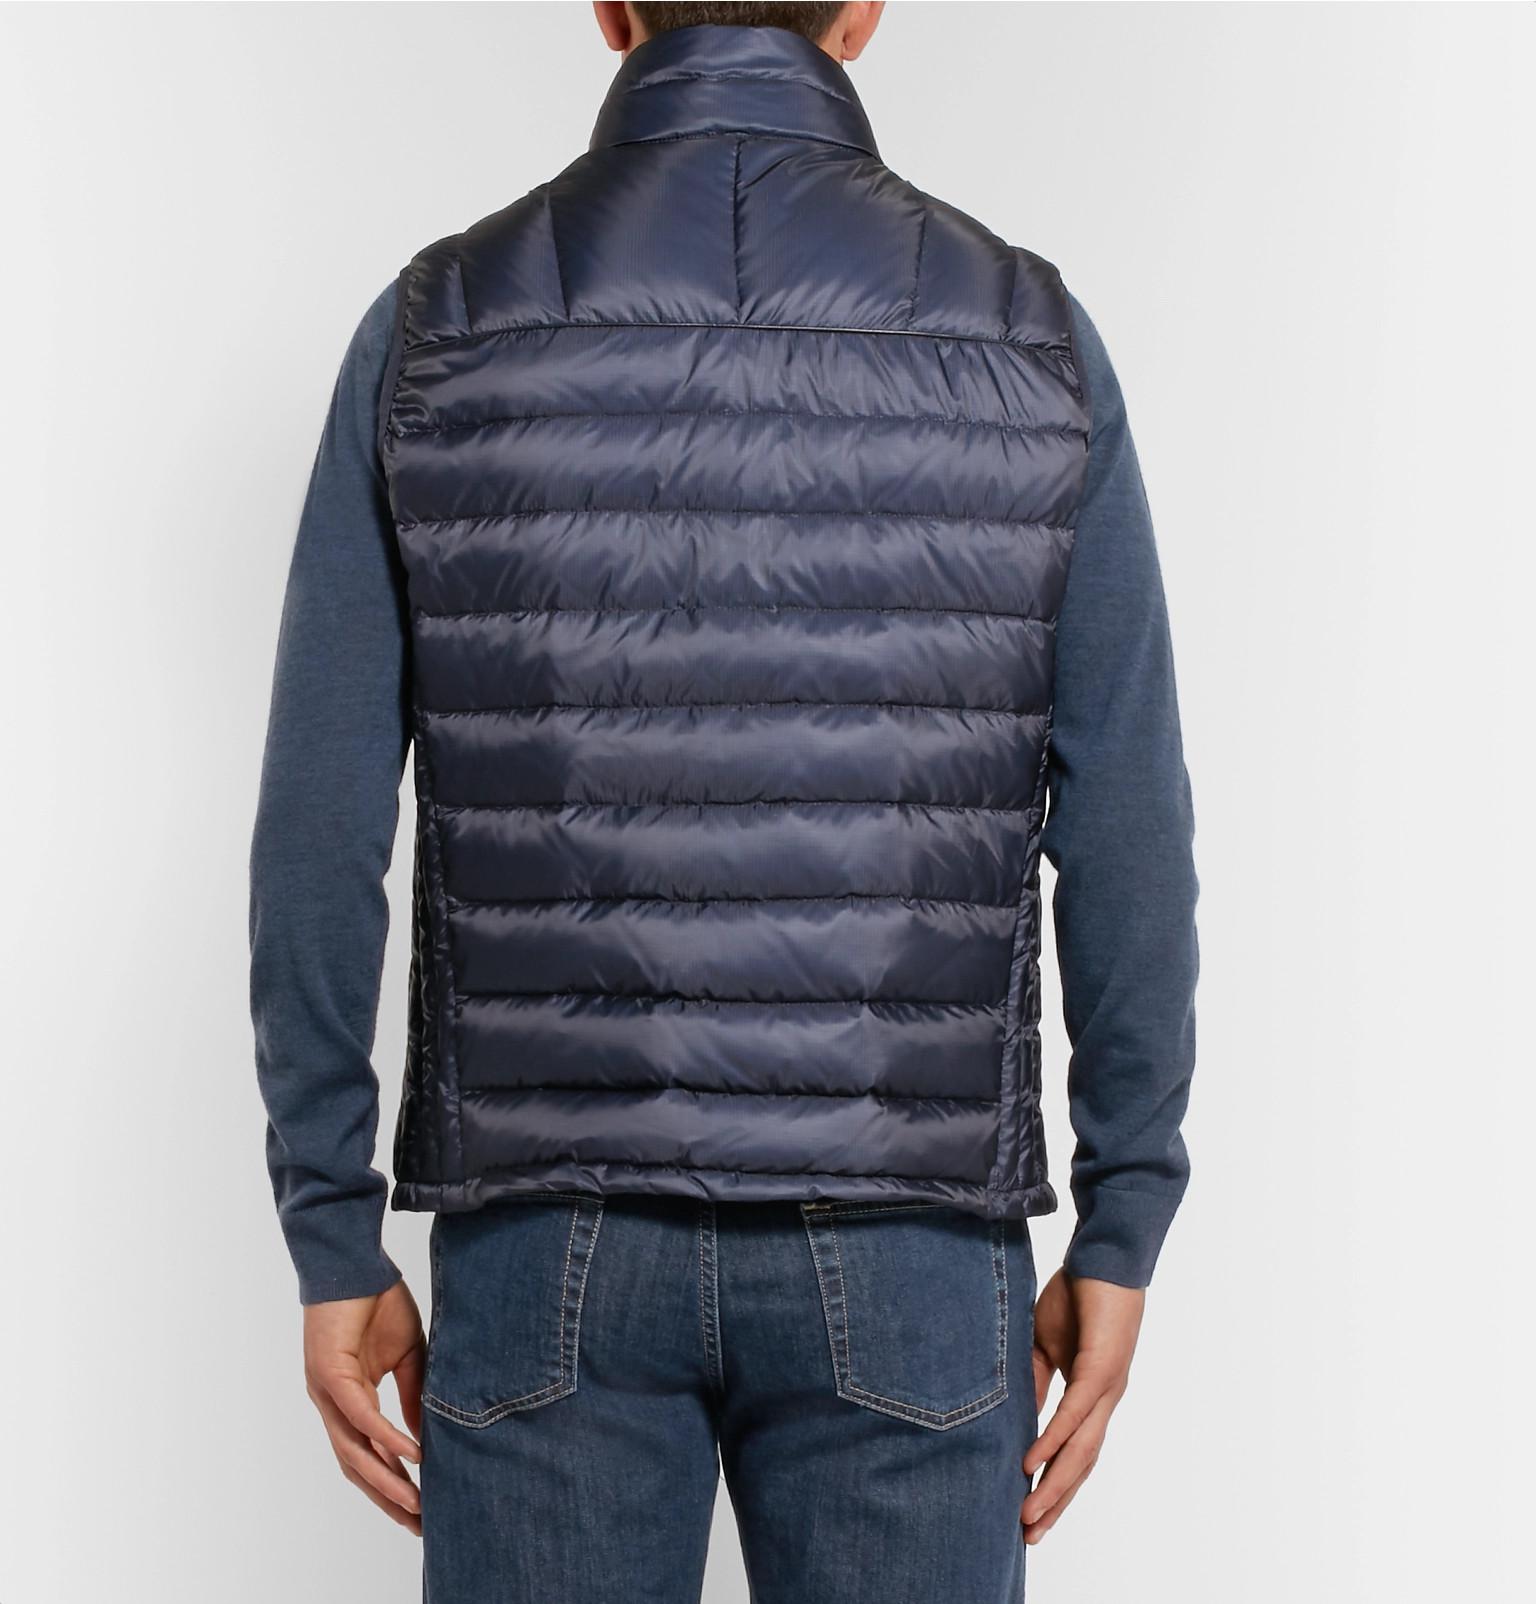 Dunhill Denim Quilted Shell Down Gilet in Navy (Blue) for Men - Lyst